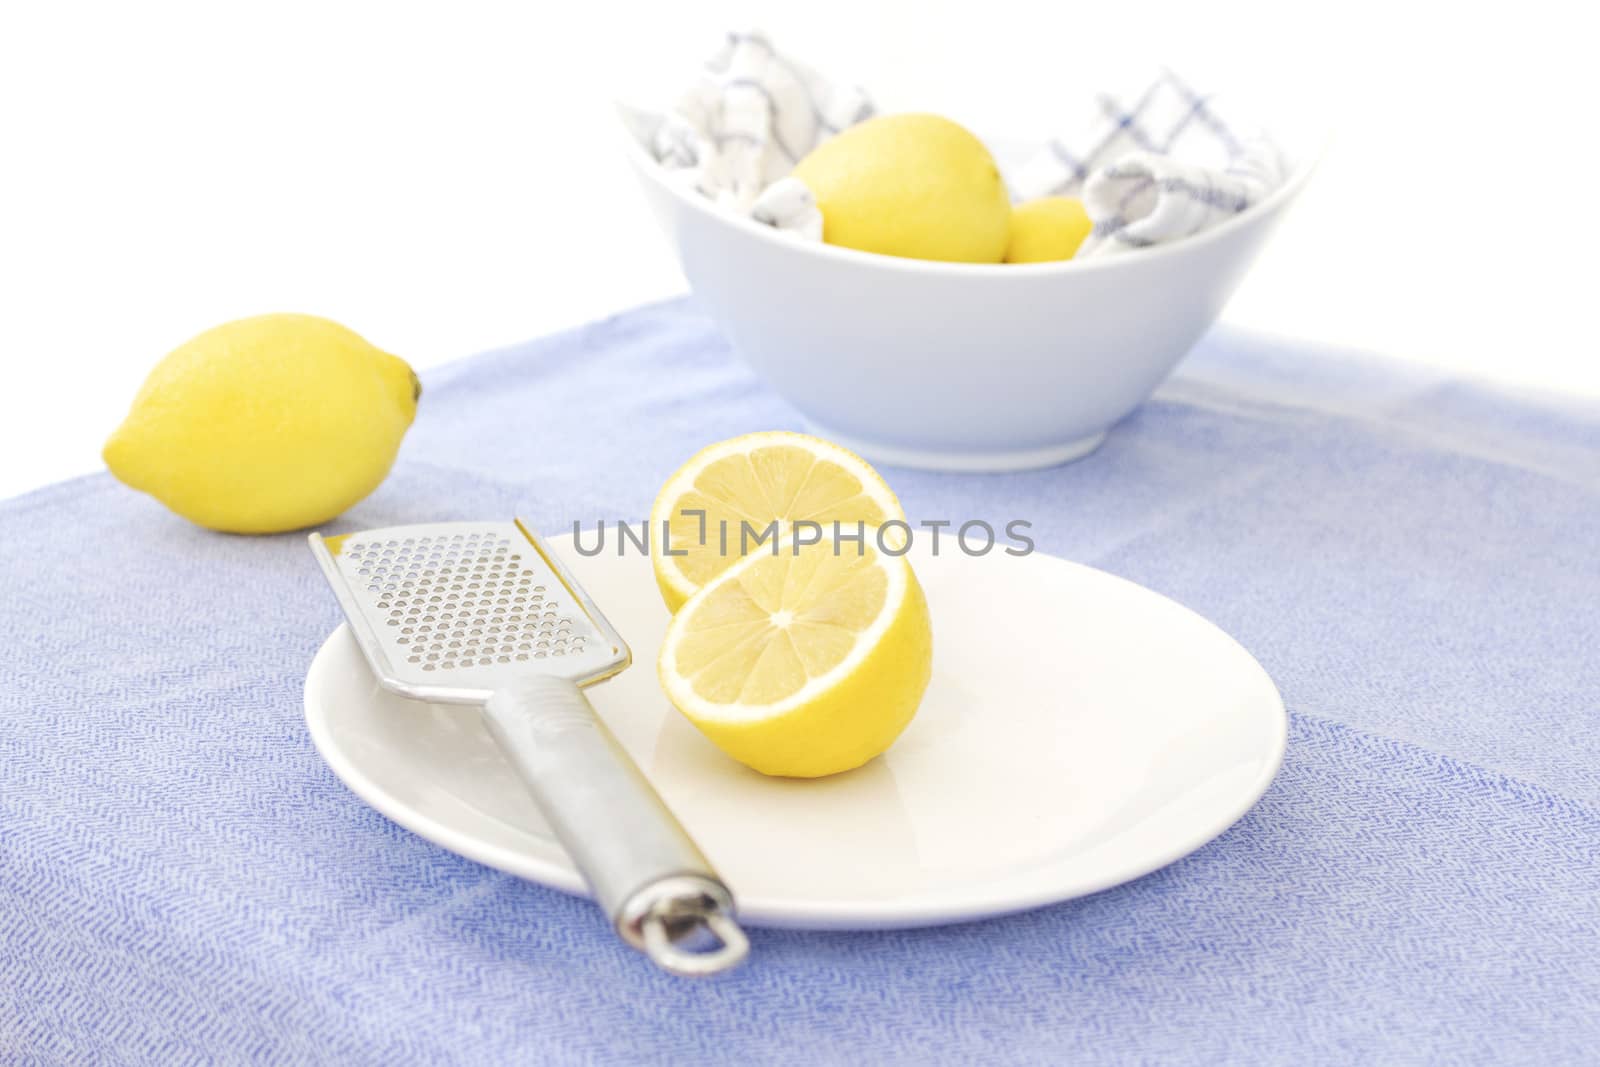 Unwaxed lemons on a plate with a lemon zester, and a bowl of lemons in the background